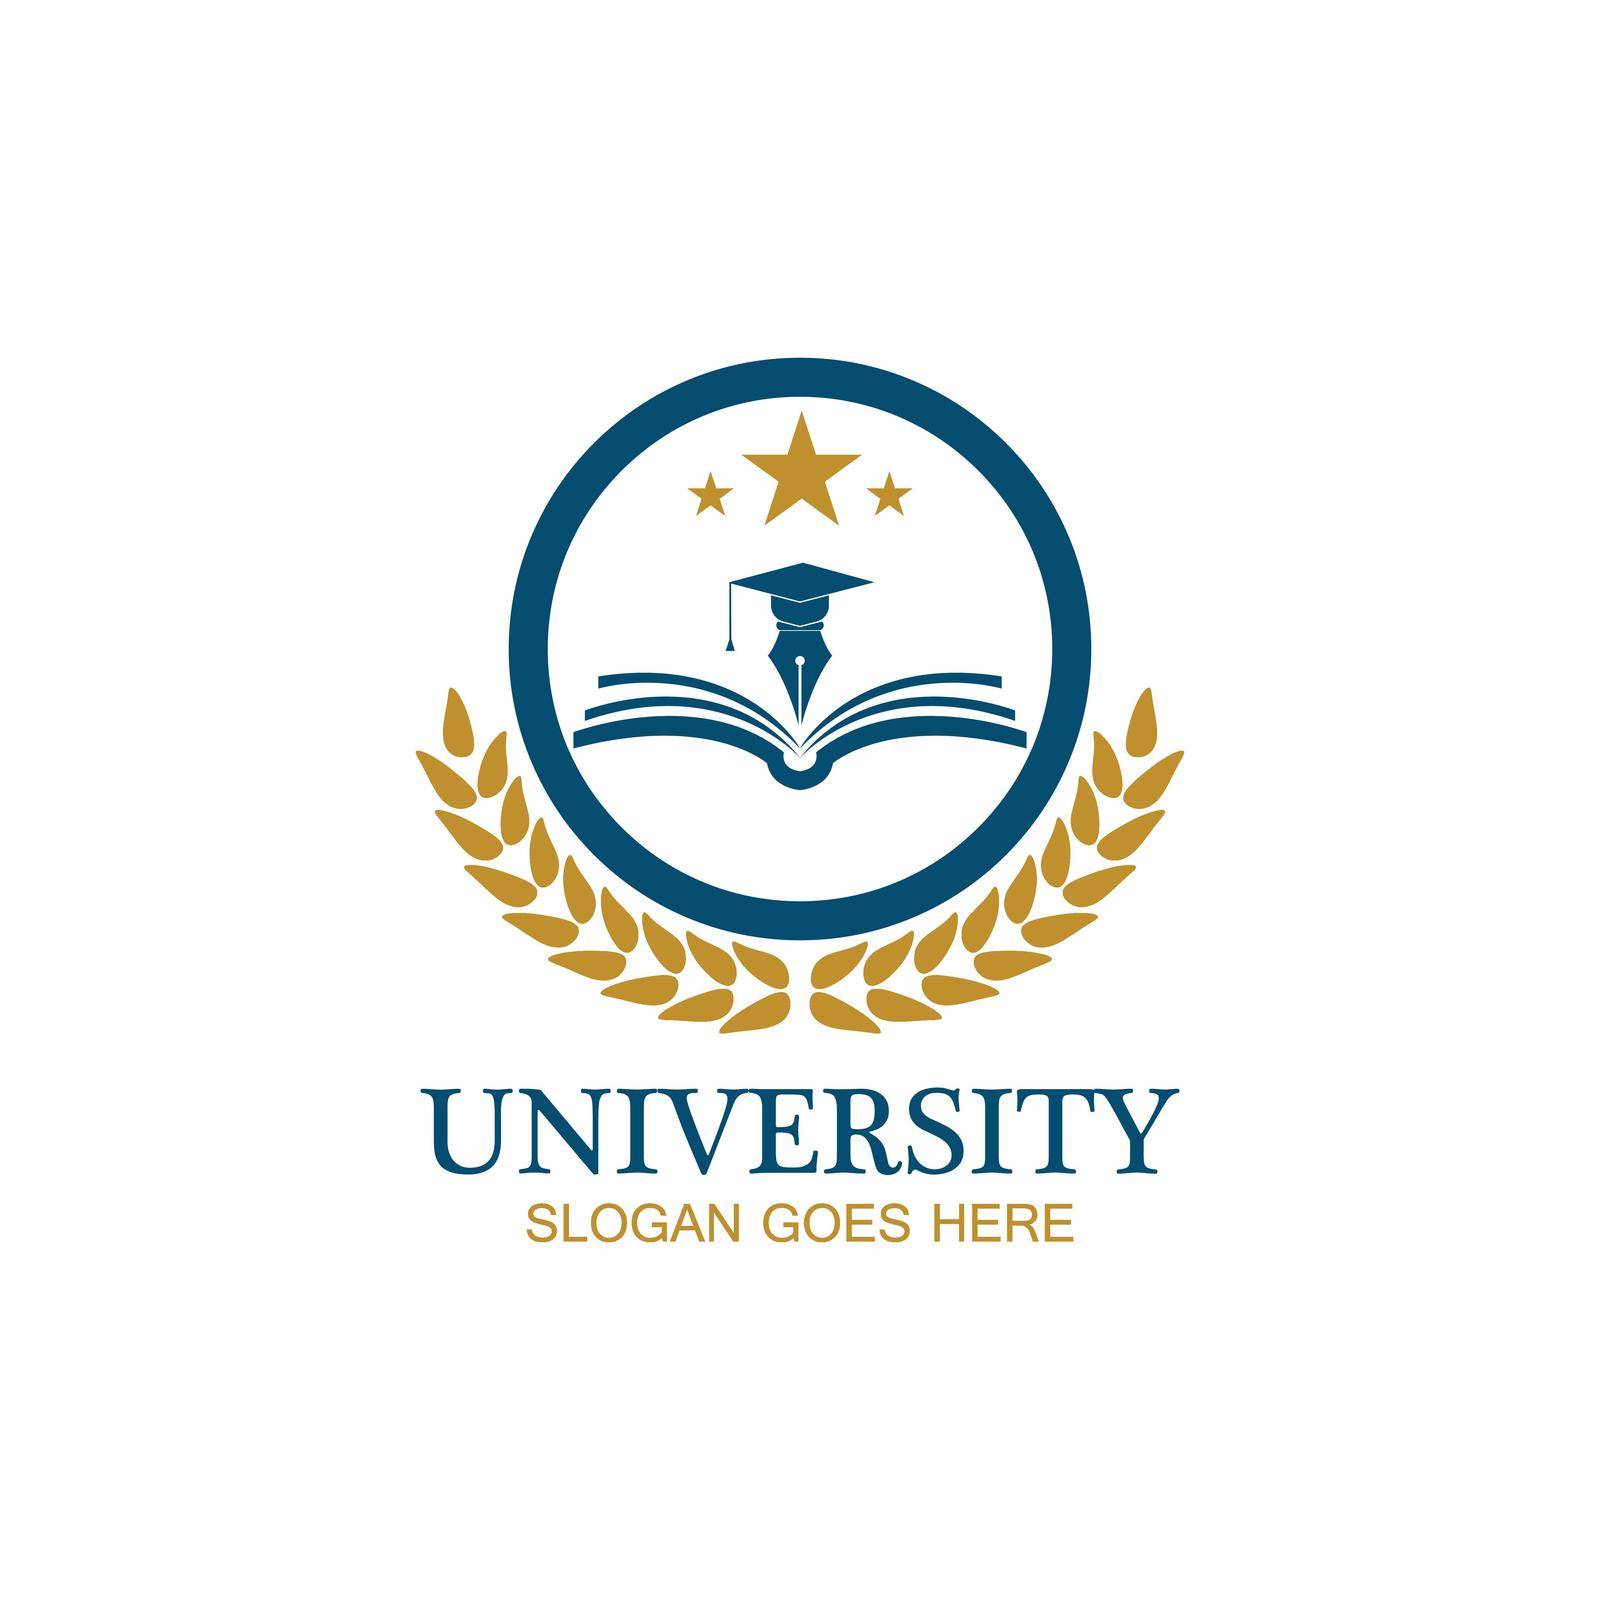 University, Academy, School and Course logo design template by Graphicindo